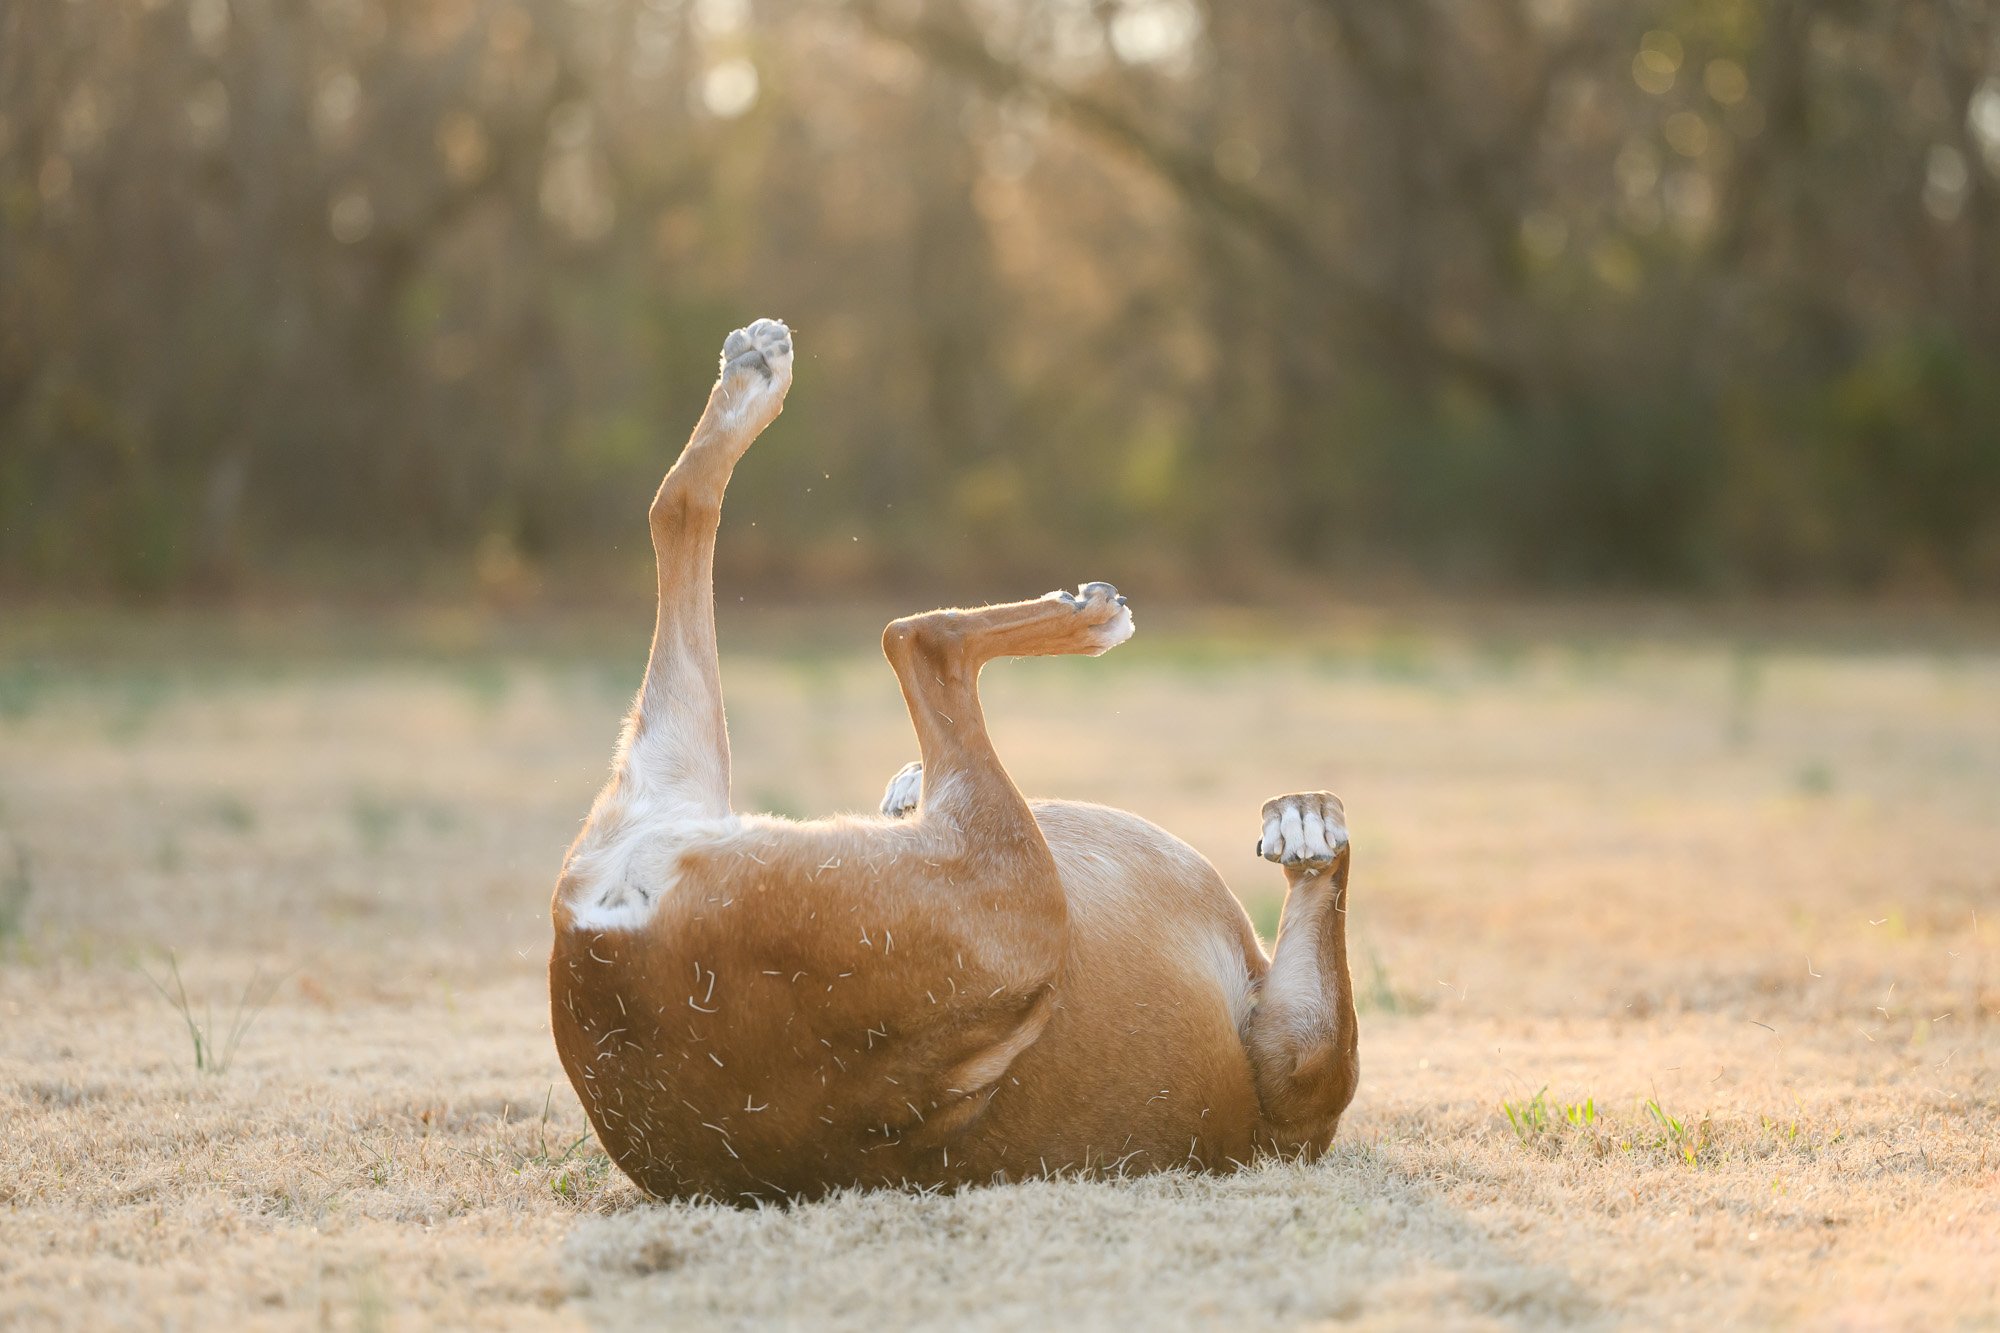 boxer dog rolling on his back in grass